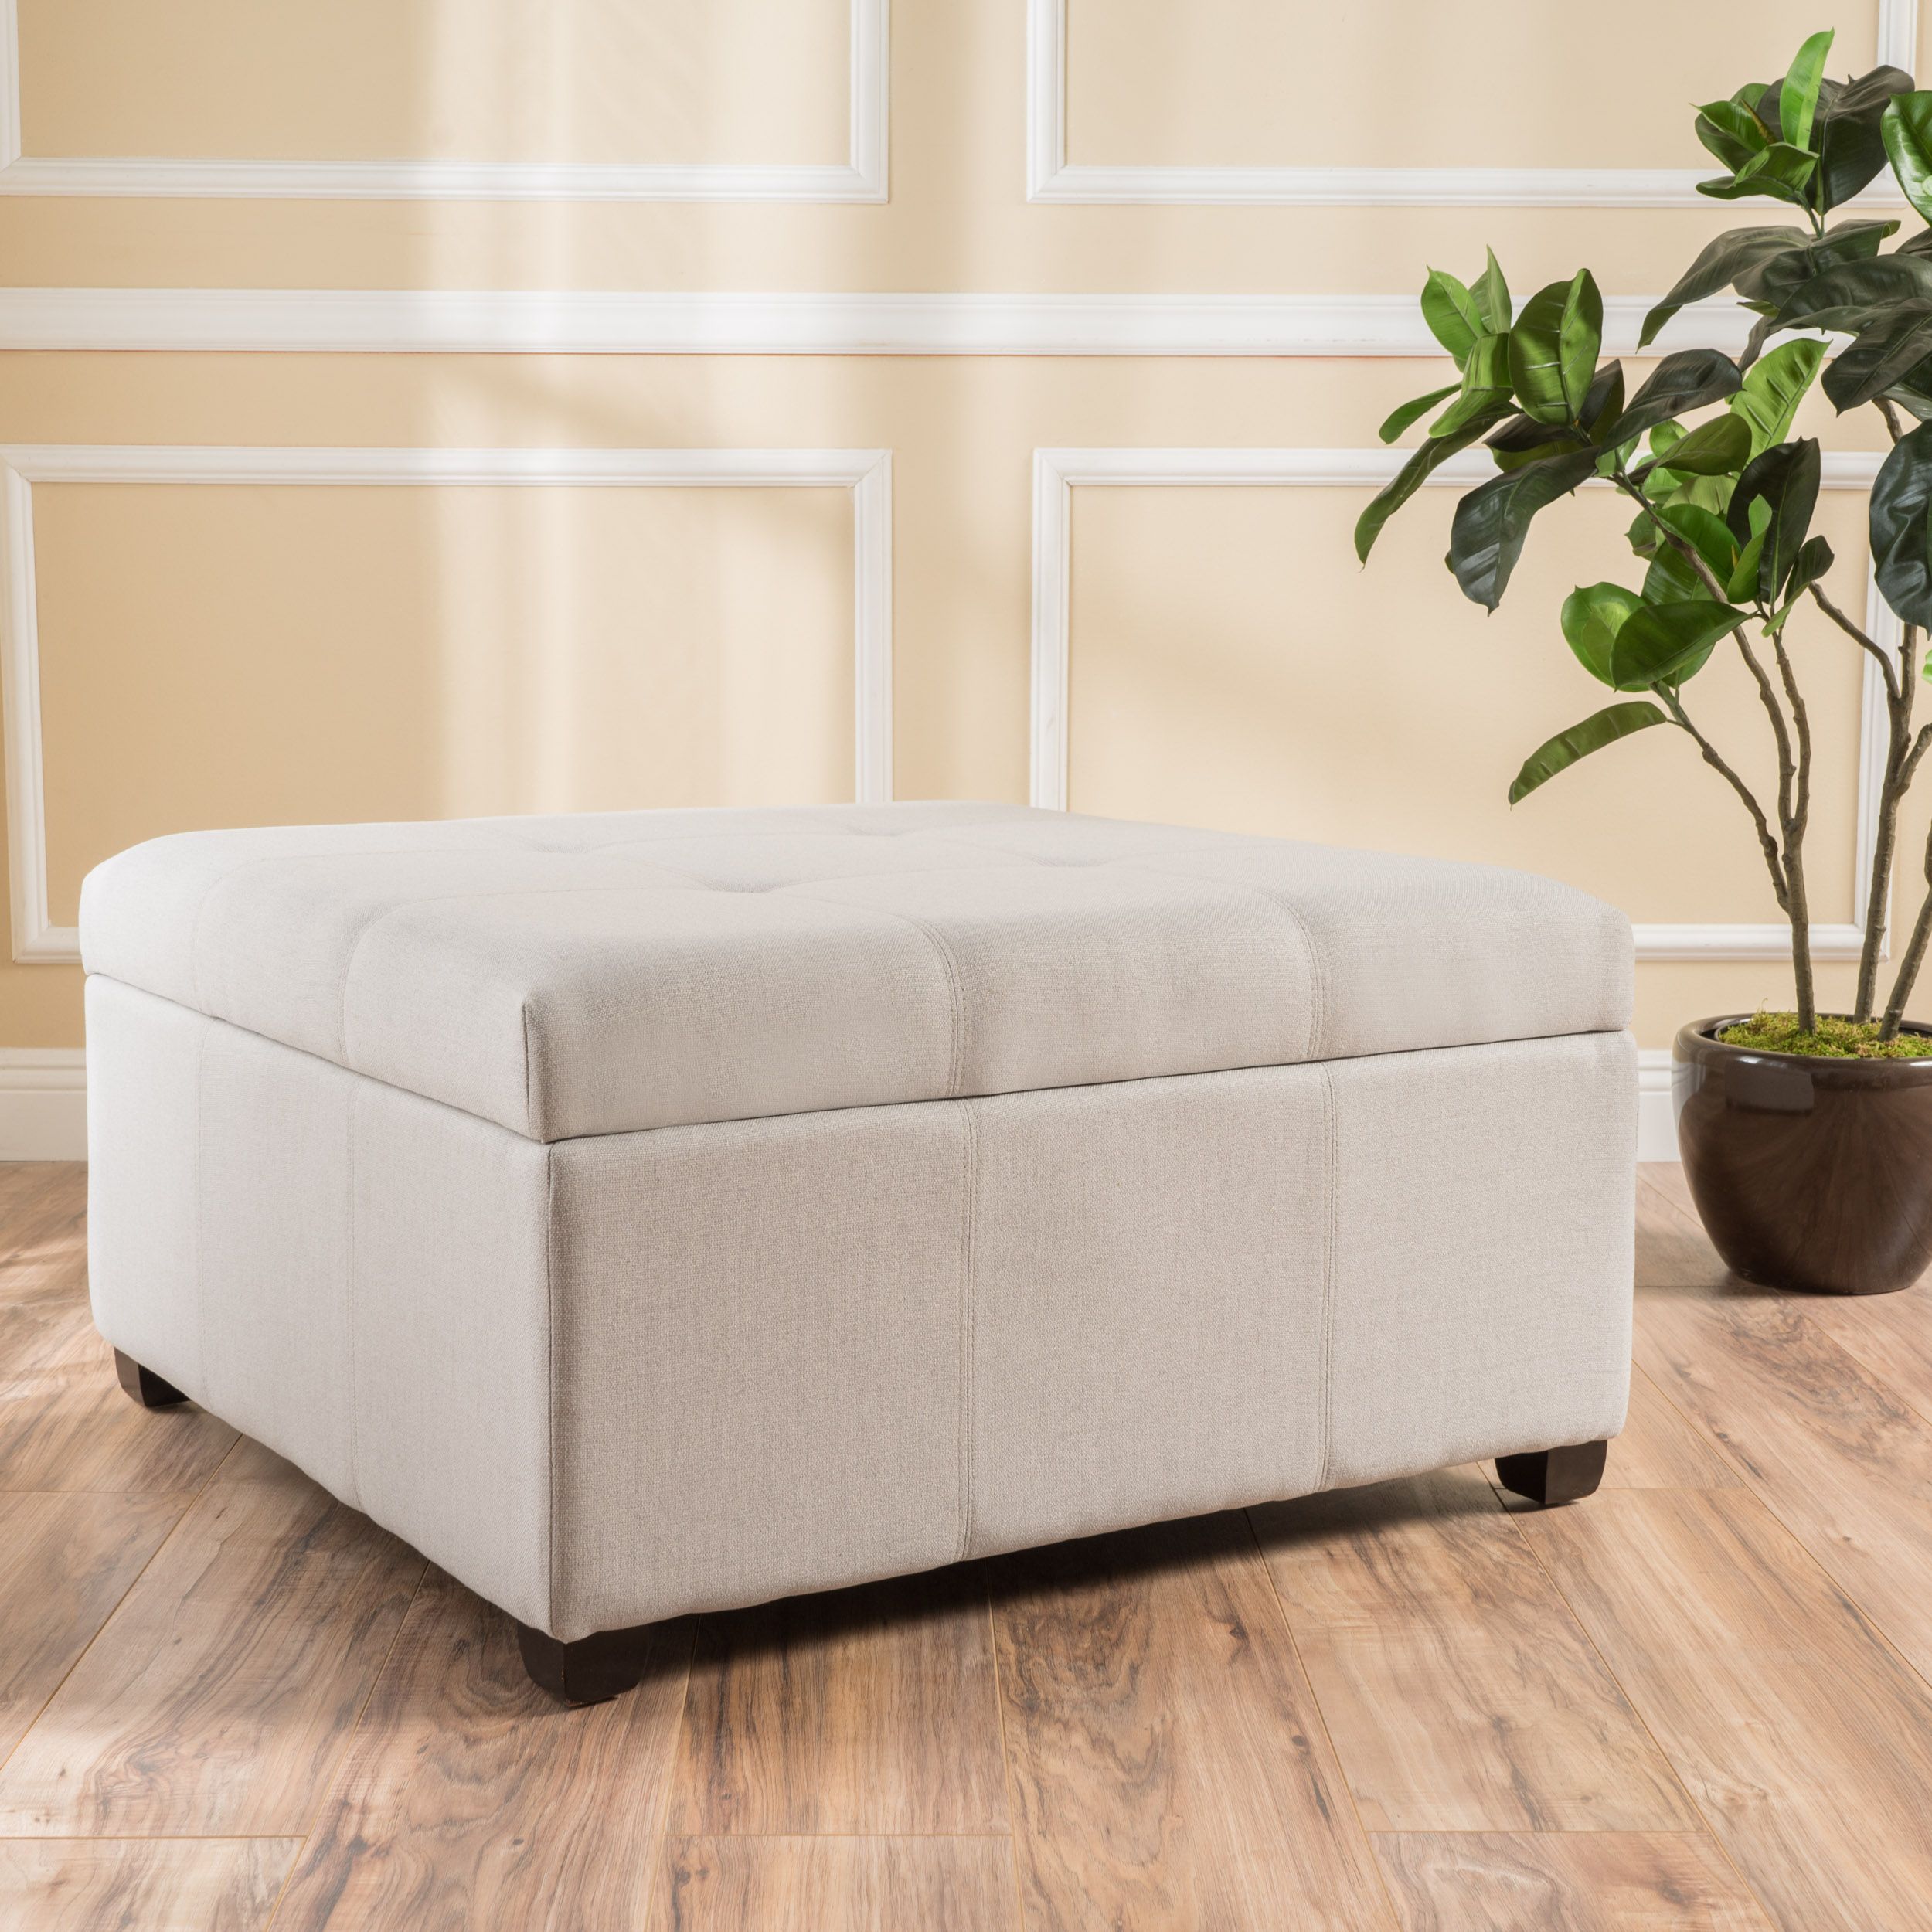 Noble House Carlton Fabric Storage Ottoman,light Grey – Walmart For Beige And Light Gray Fabric Pouf Ottomans (View 6 of 20)